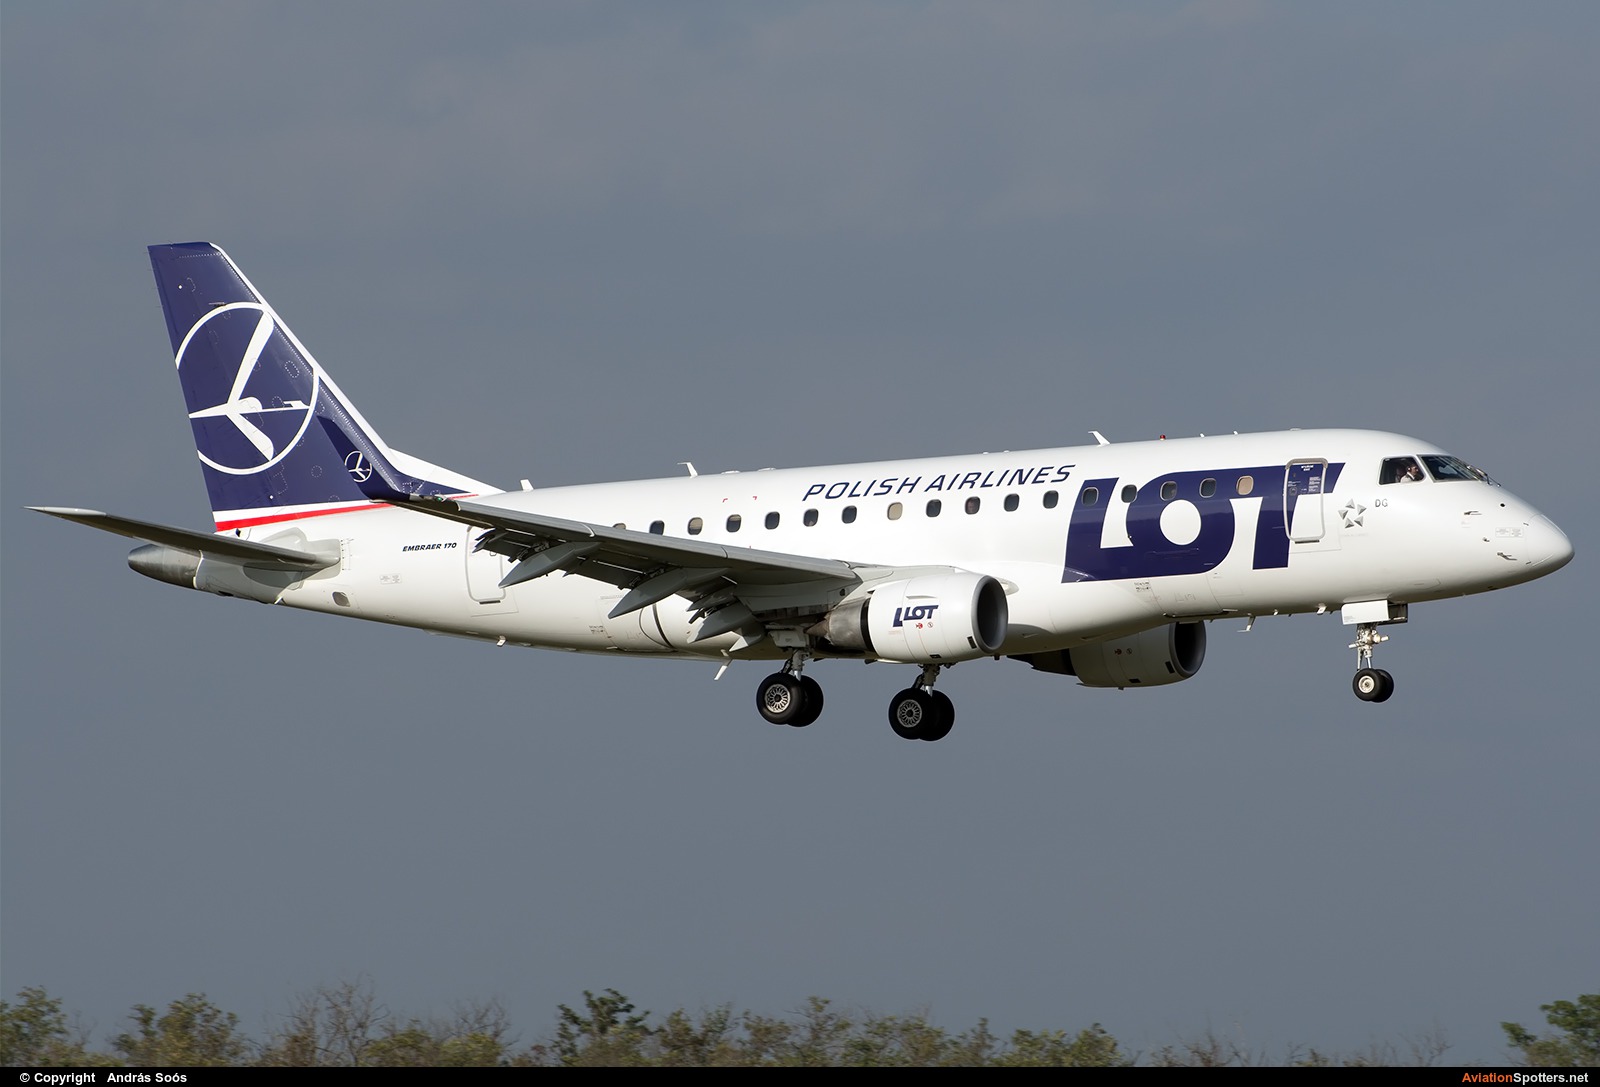 LOT - Polish Airlines  -  170  (SP-LDG) By András Soós (sas1965)